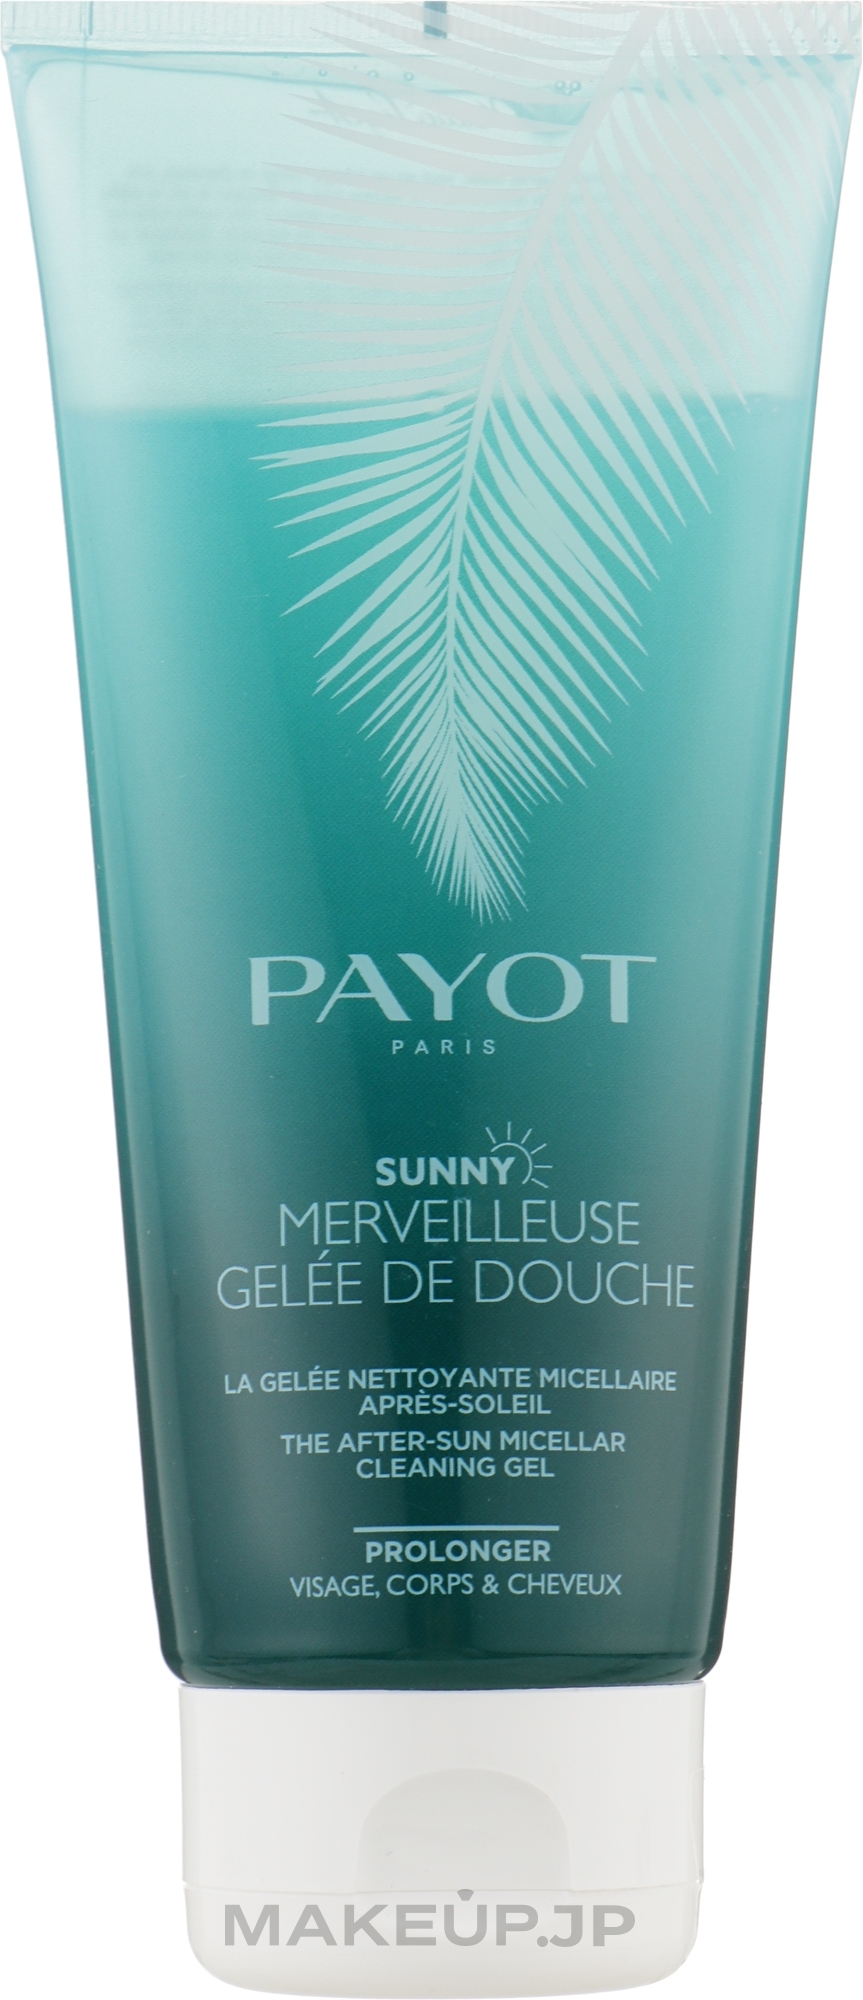 After Sun Micellar Shower Gel - Payot Sunny The After-Sun Micellar Cleaning Gel — photo 200 ml